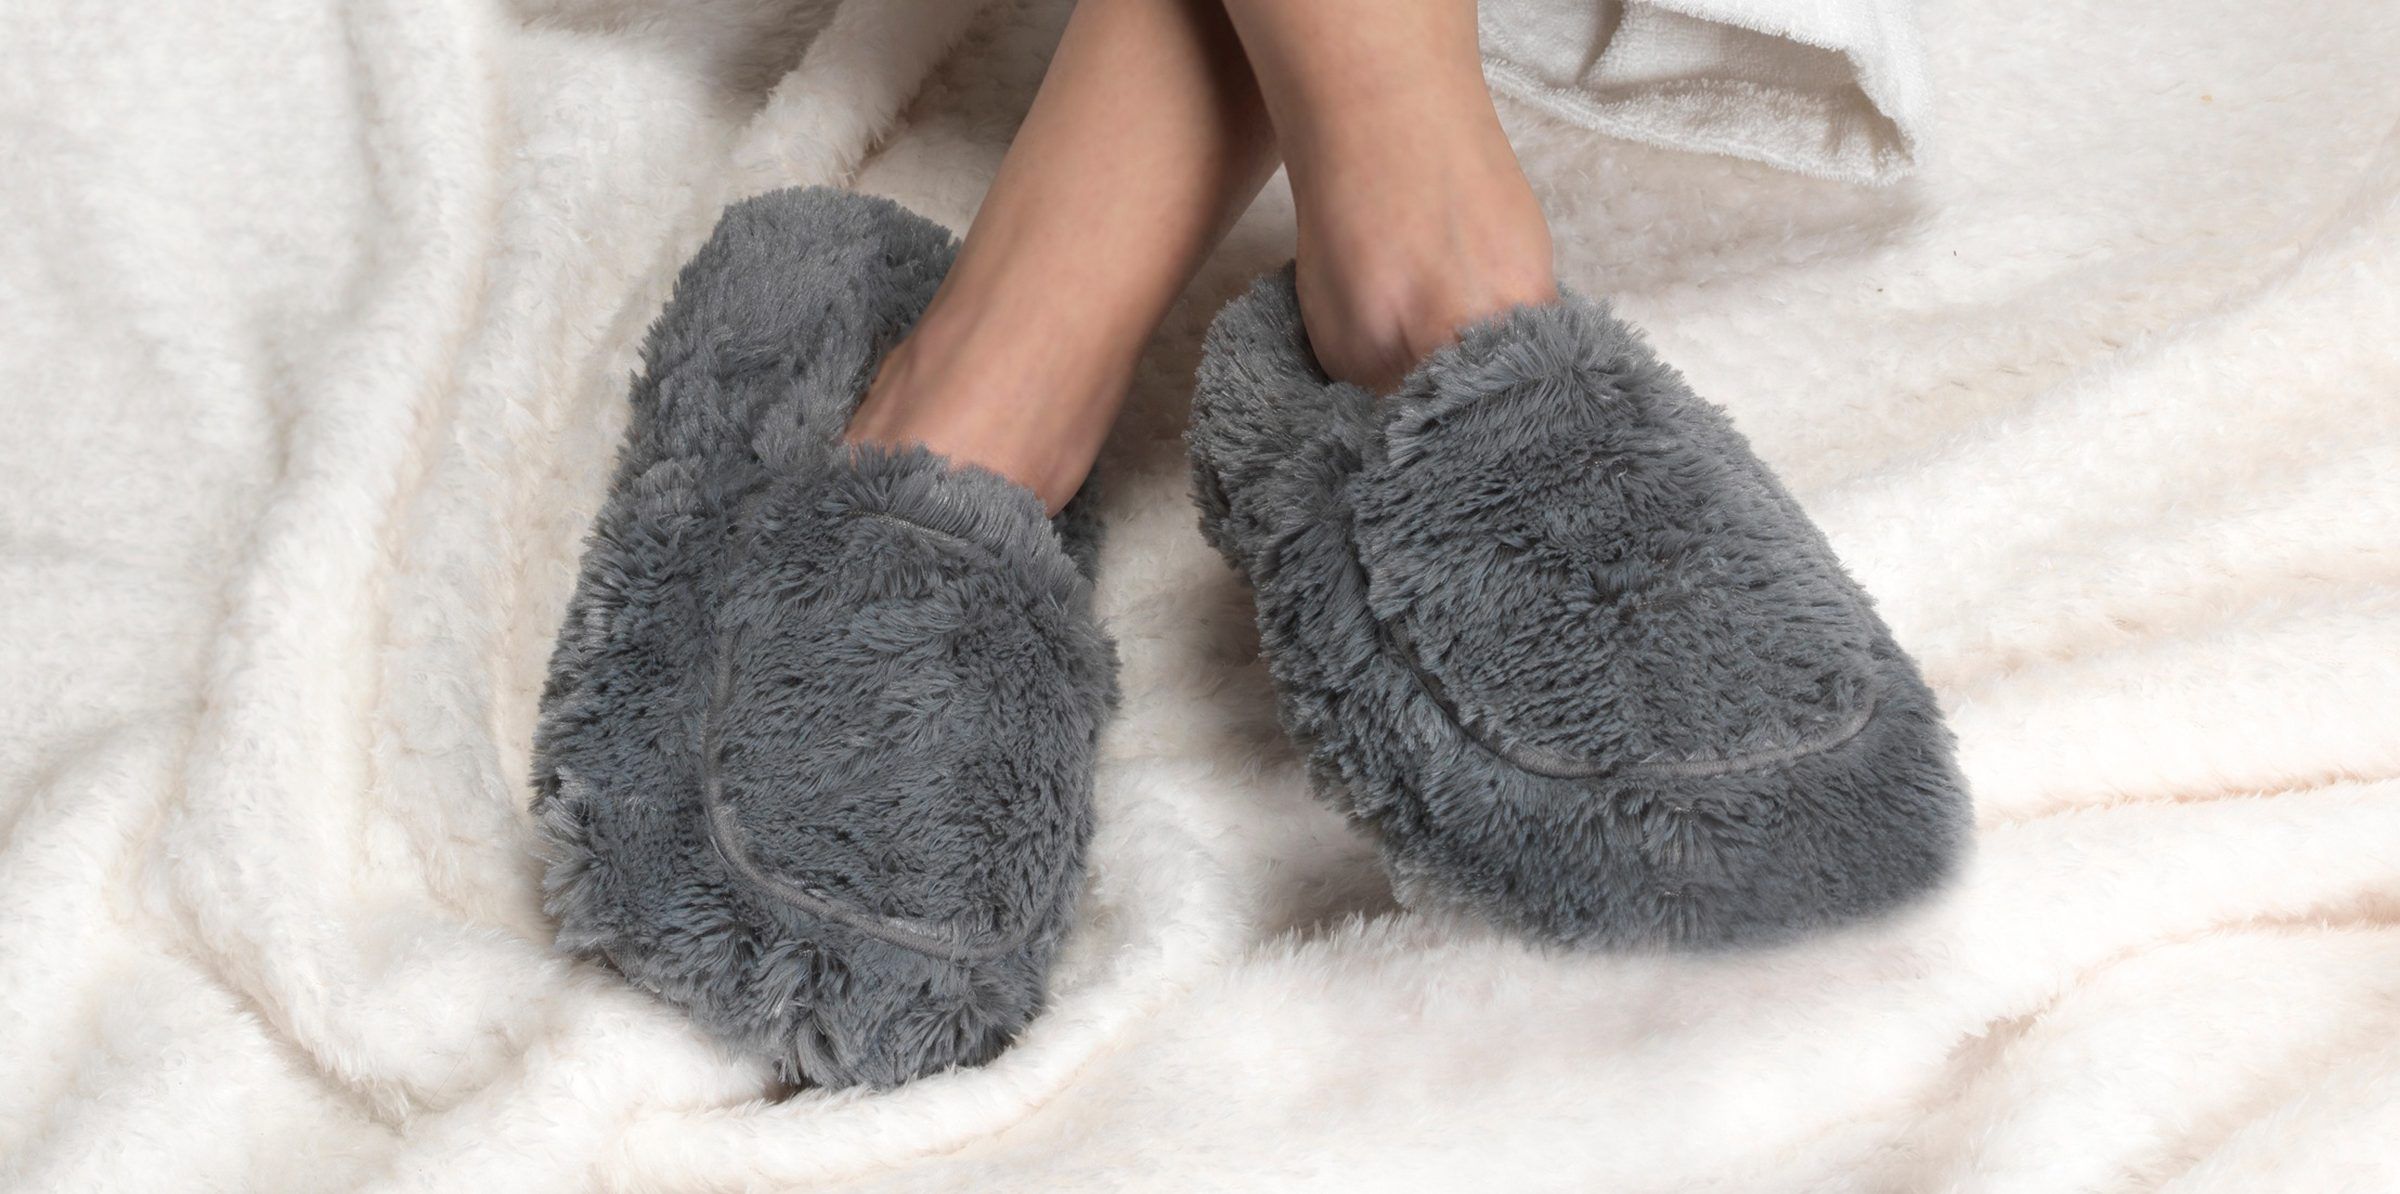 How to Wash Your Slippers | ReviewThis